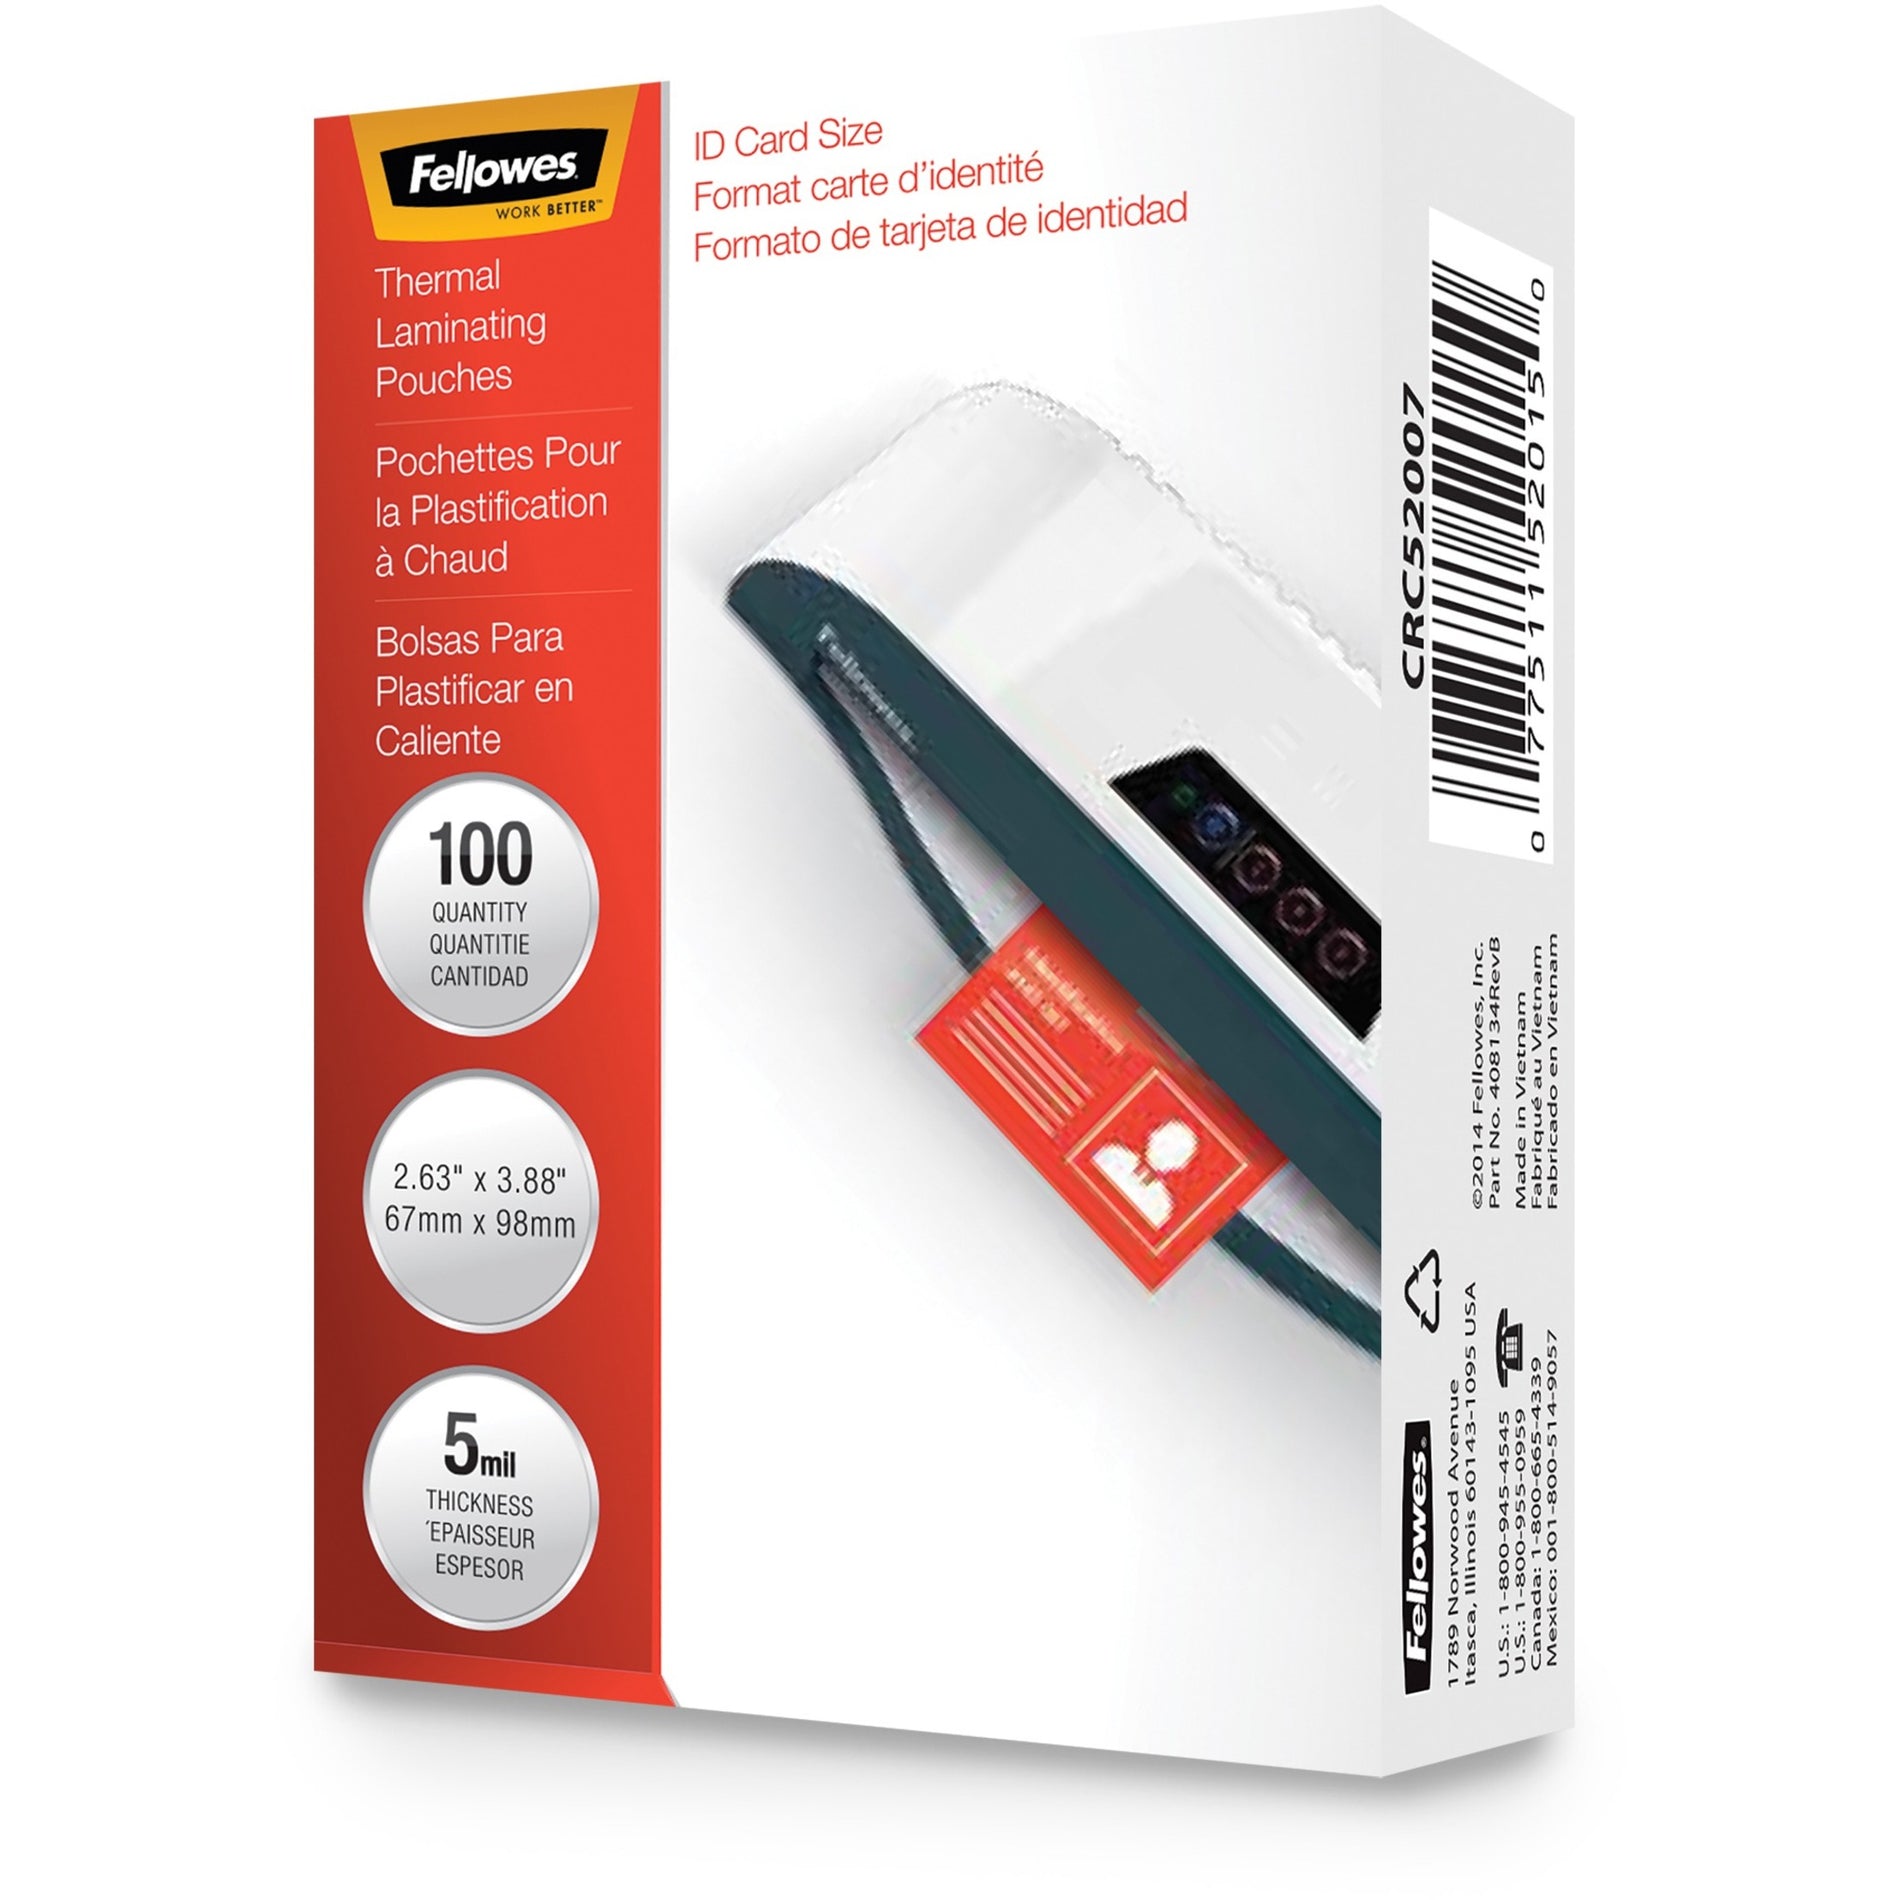 Fellowes 52015 Glossy Laminating ID Pouches, Unpunched, 5 mil, 100 Pack